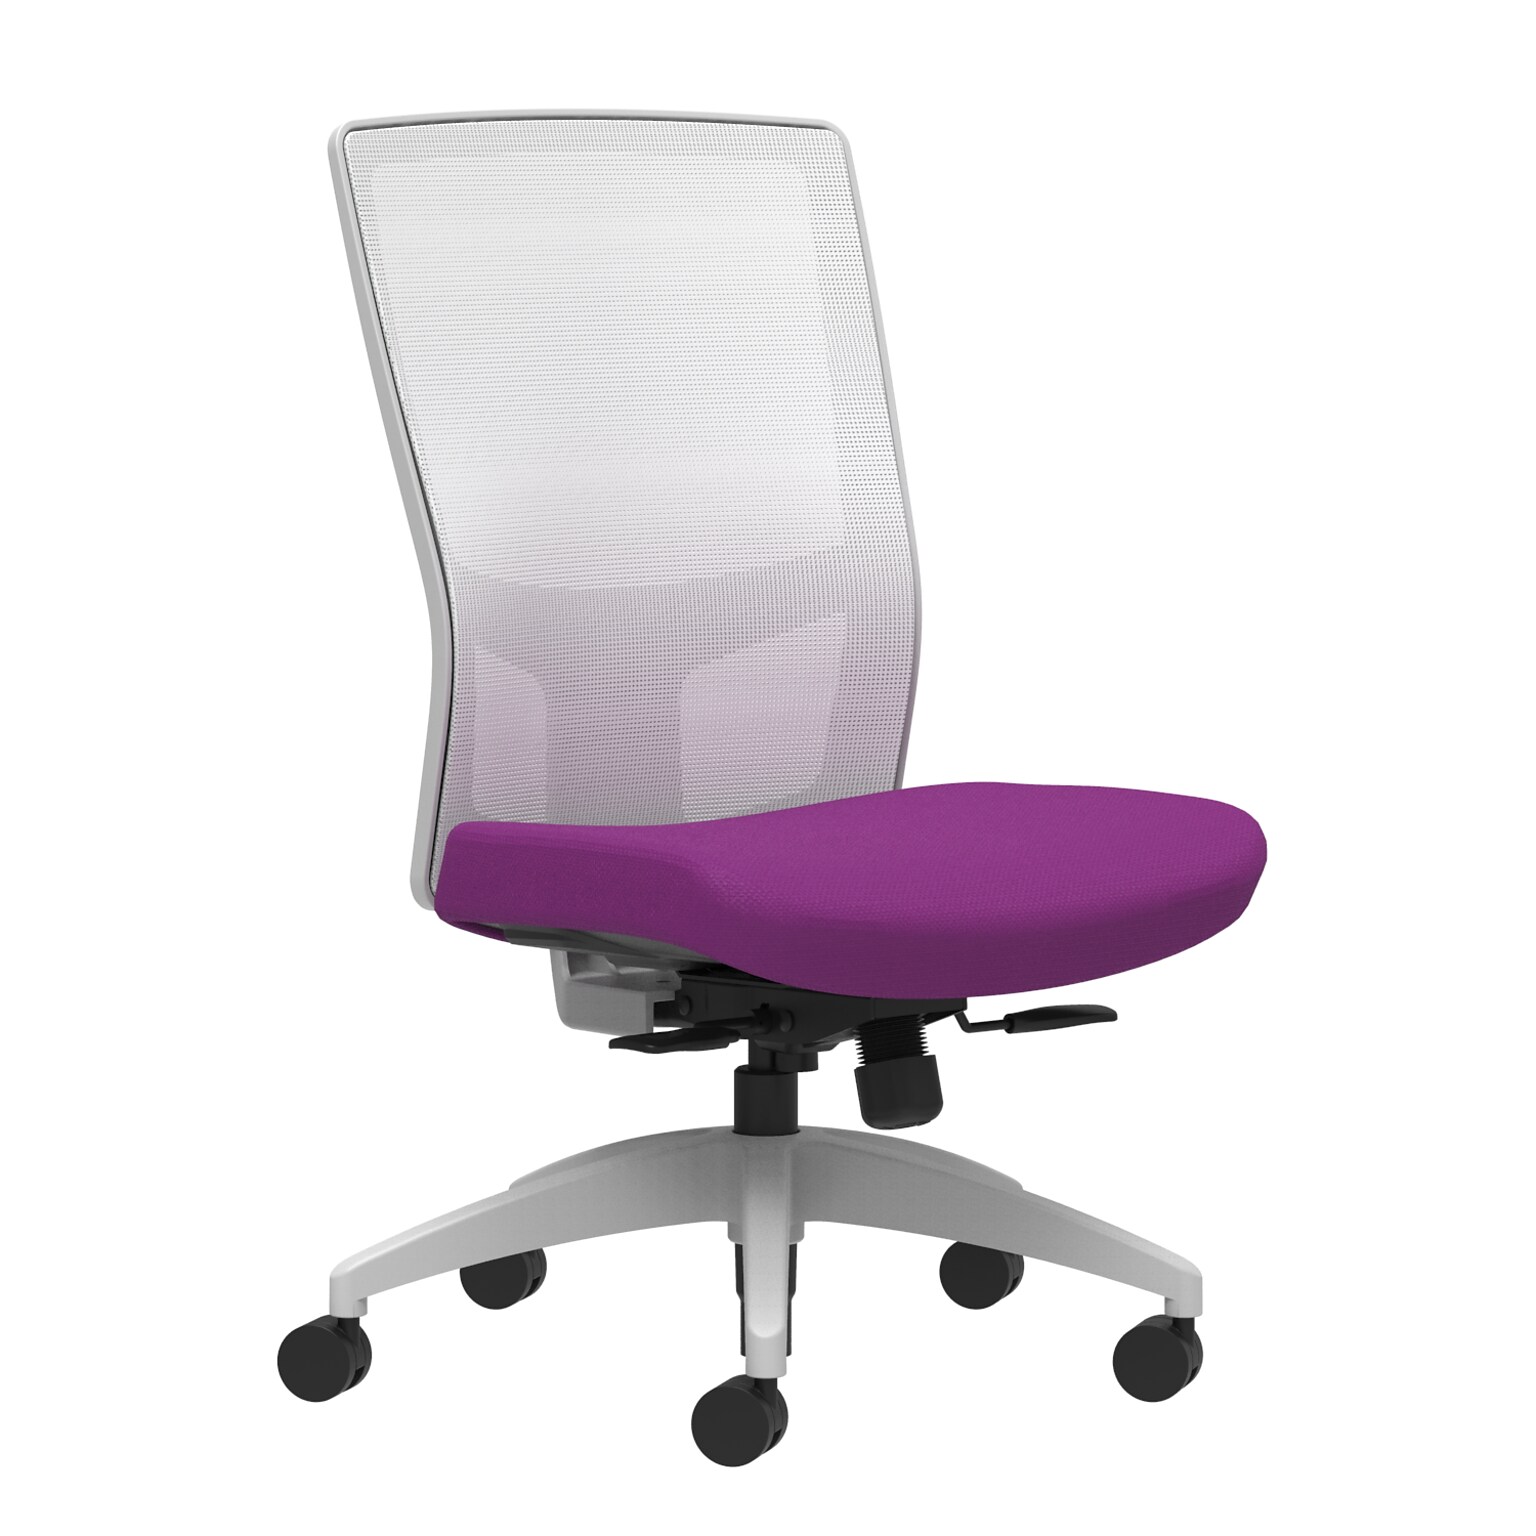 Union & Scale Workplace2.0™ Fabric Task Chair, Amethyst, Integrated Lumbar, Armless, Synchro-Tilt w/ Seat Slide Control (53492)